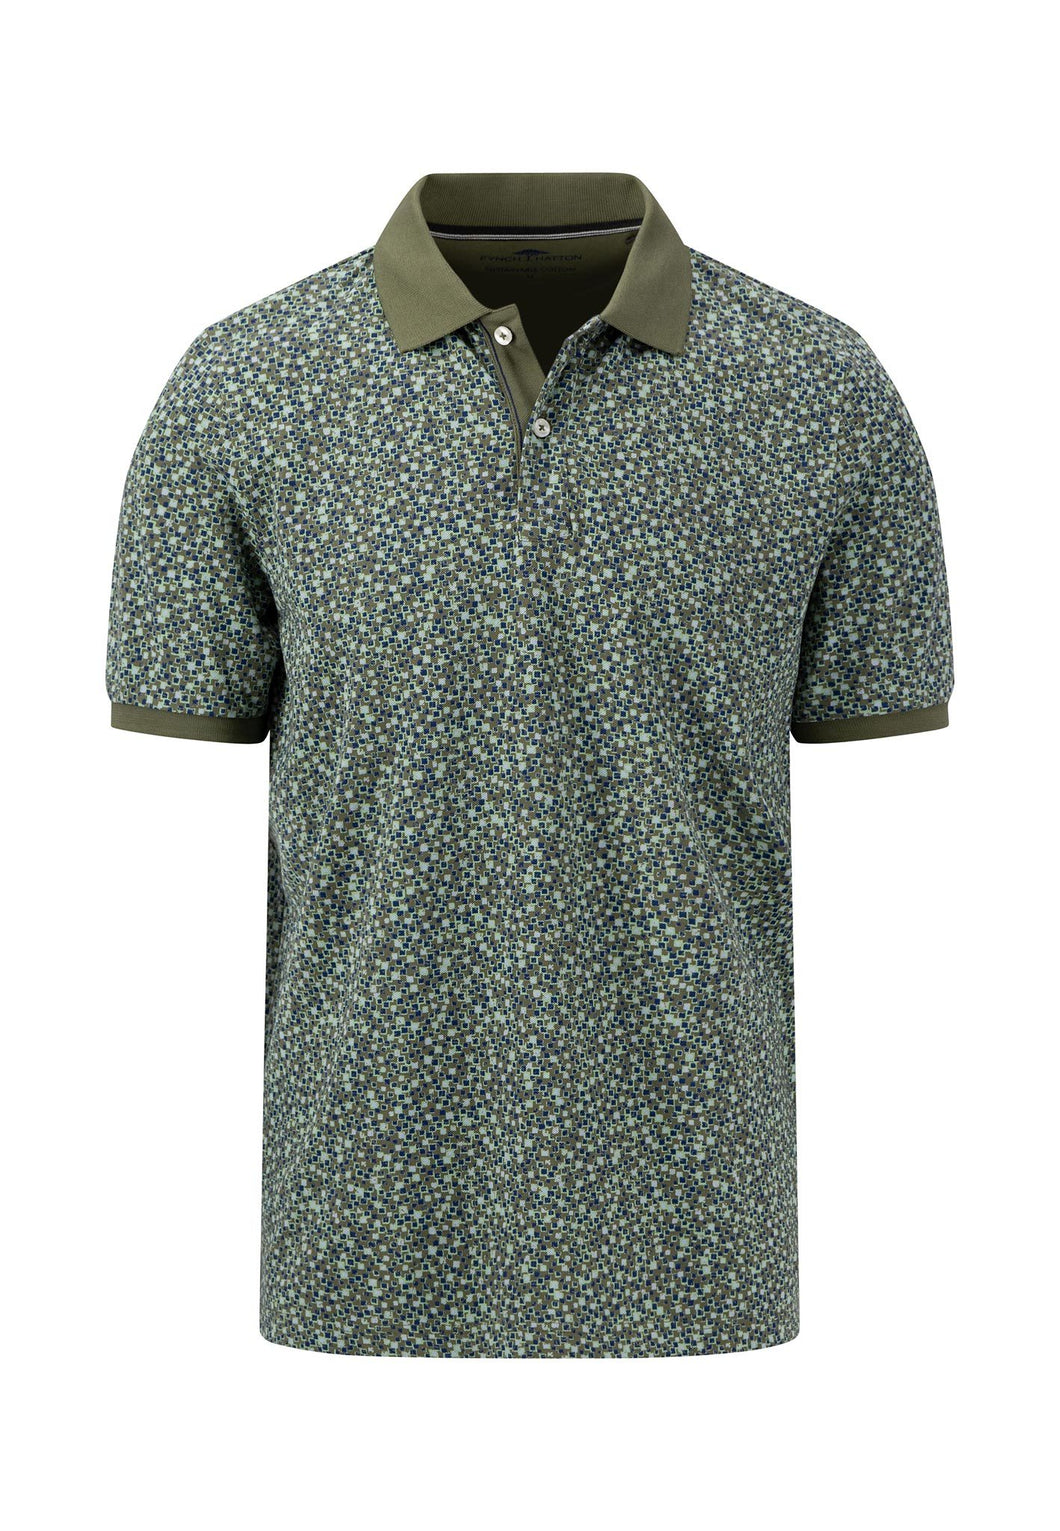 New Fynch Hatton Olive Abstract Polo Shirt